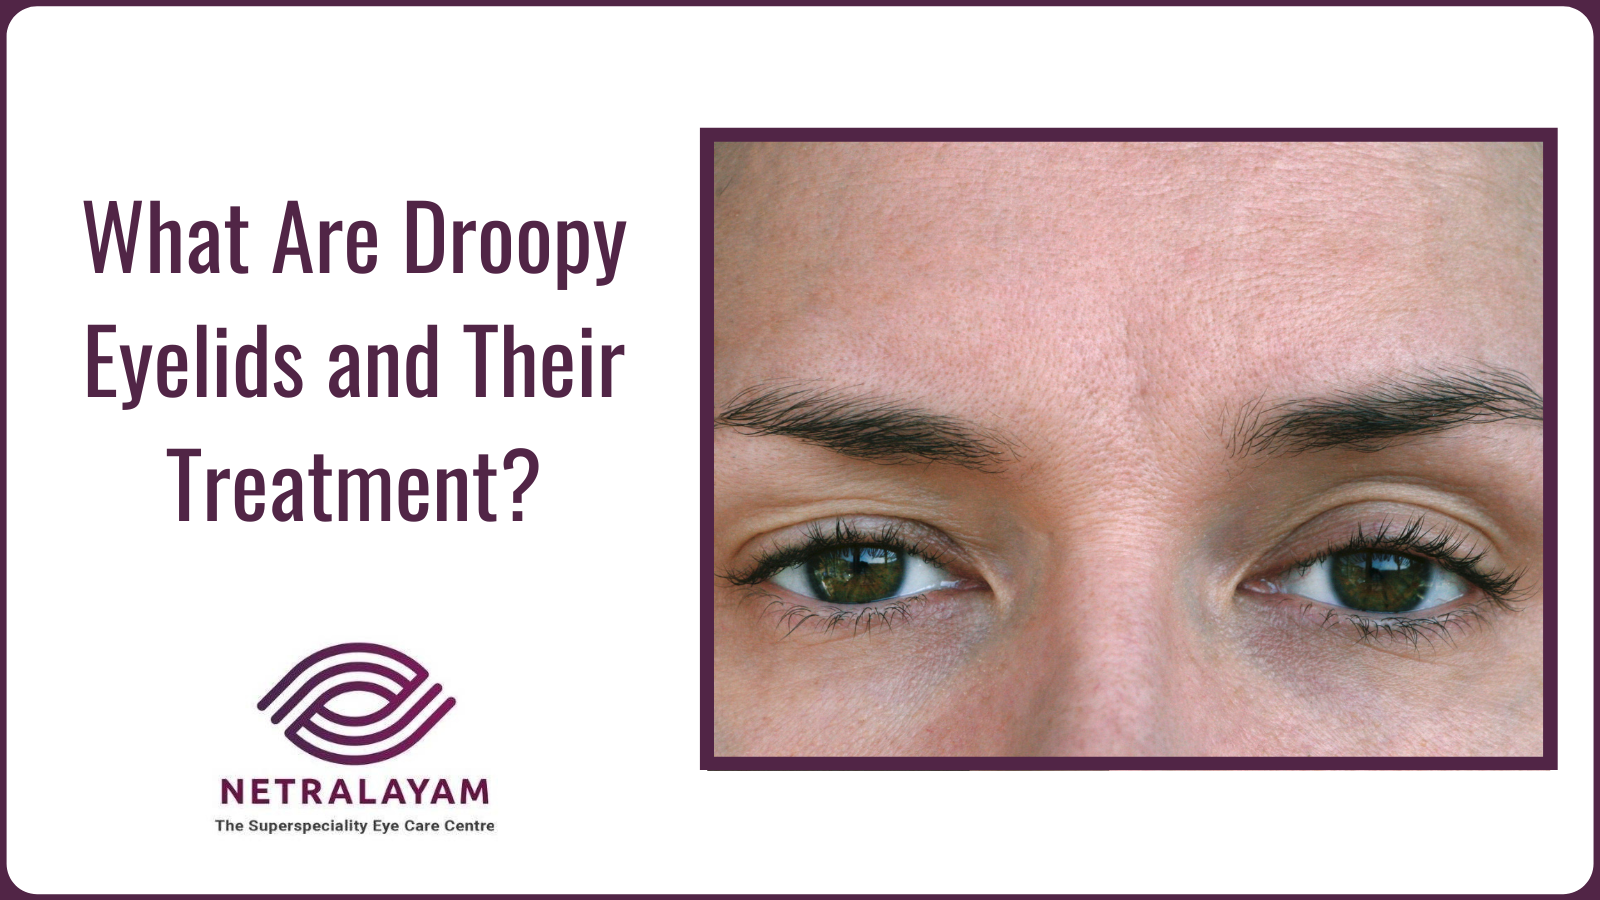 What Are Droopy Eyelids and Their Treatment?